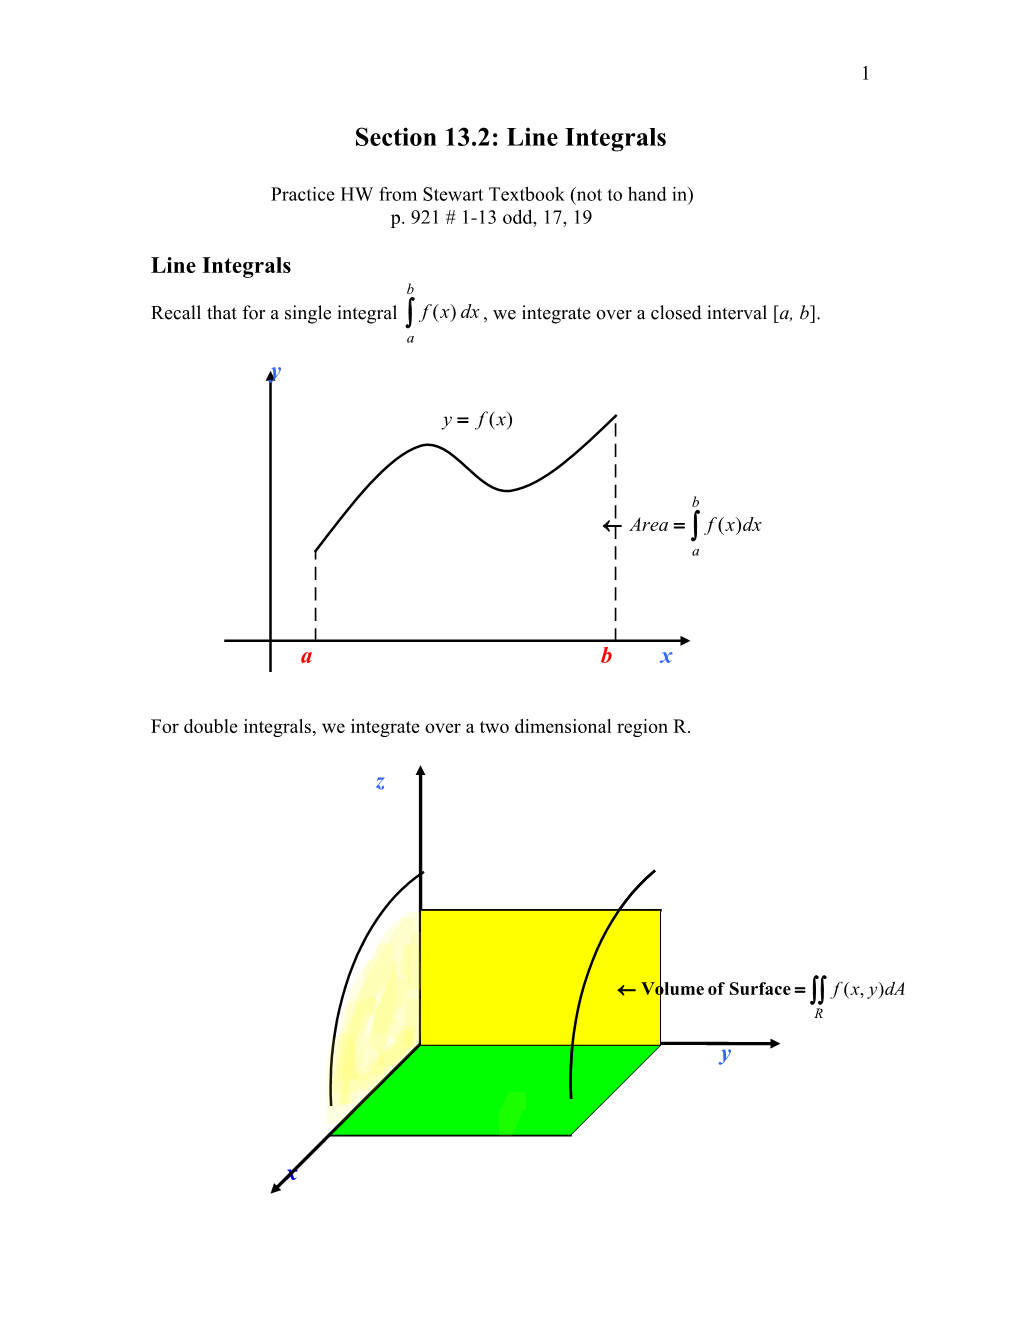 Section 13.2: Line Integrals